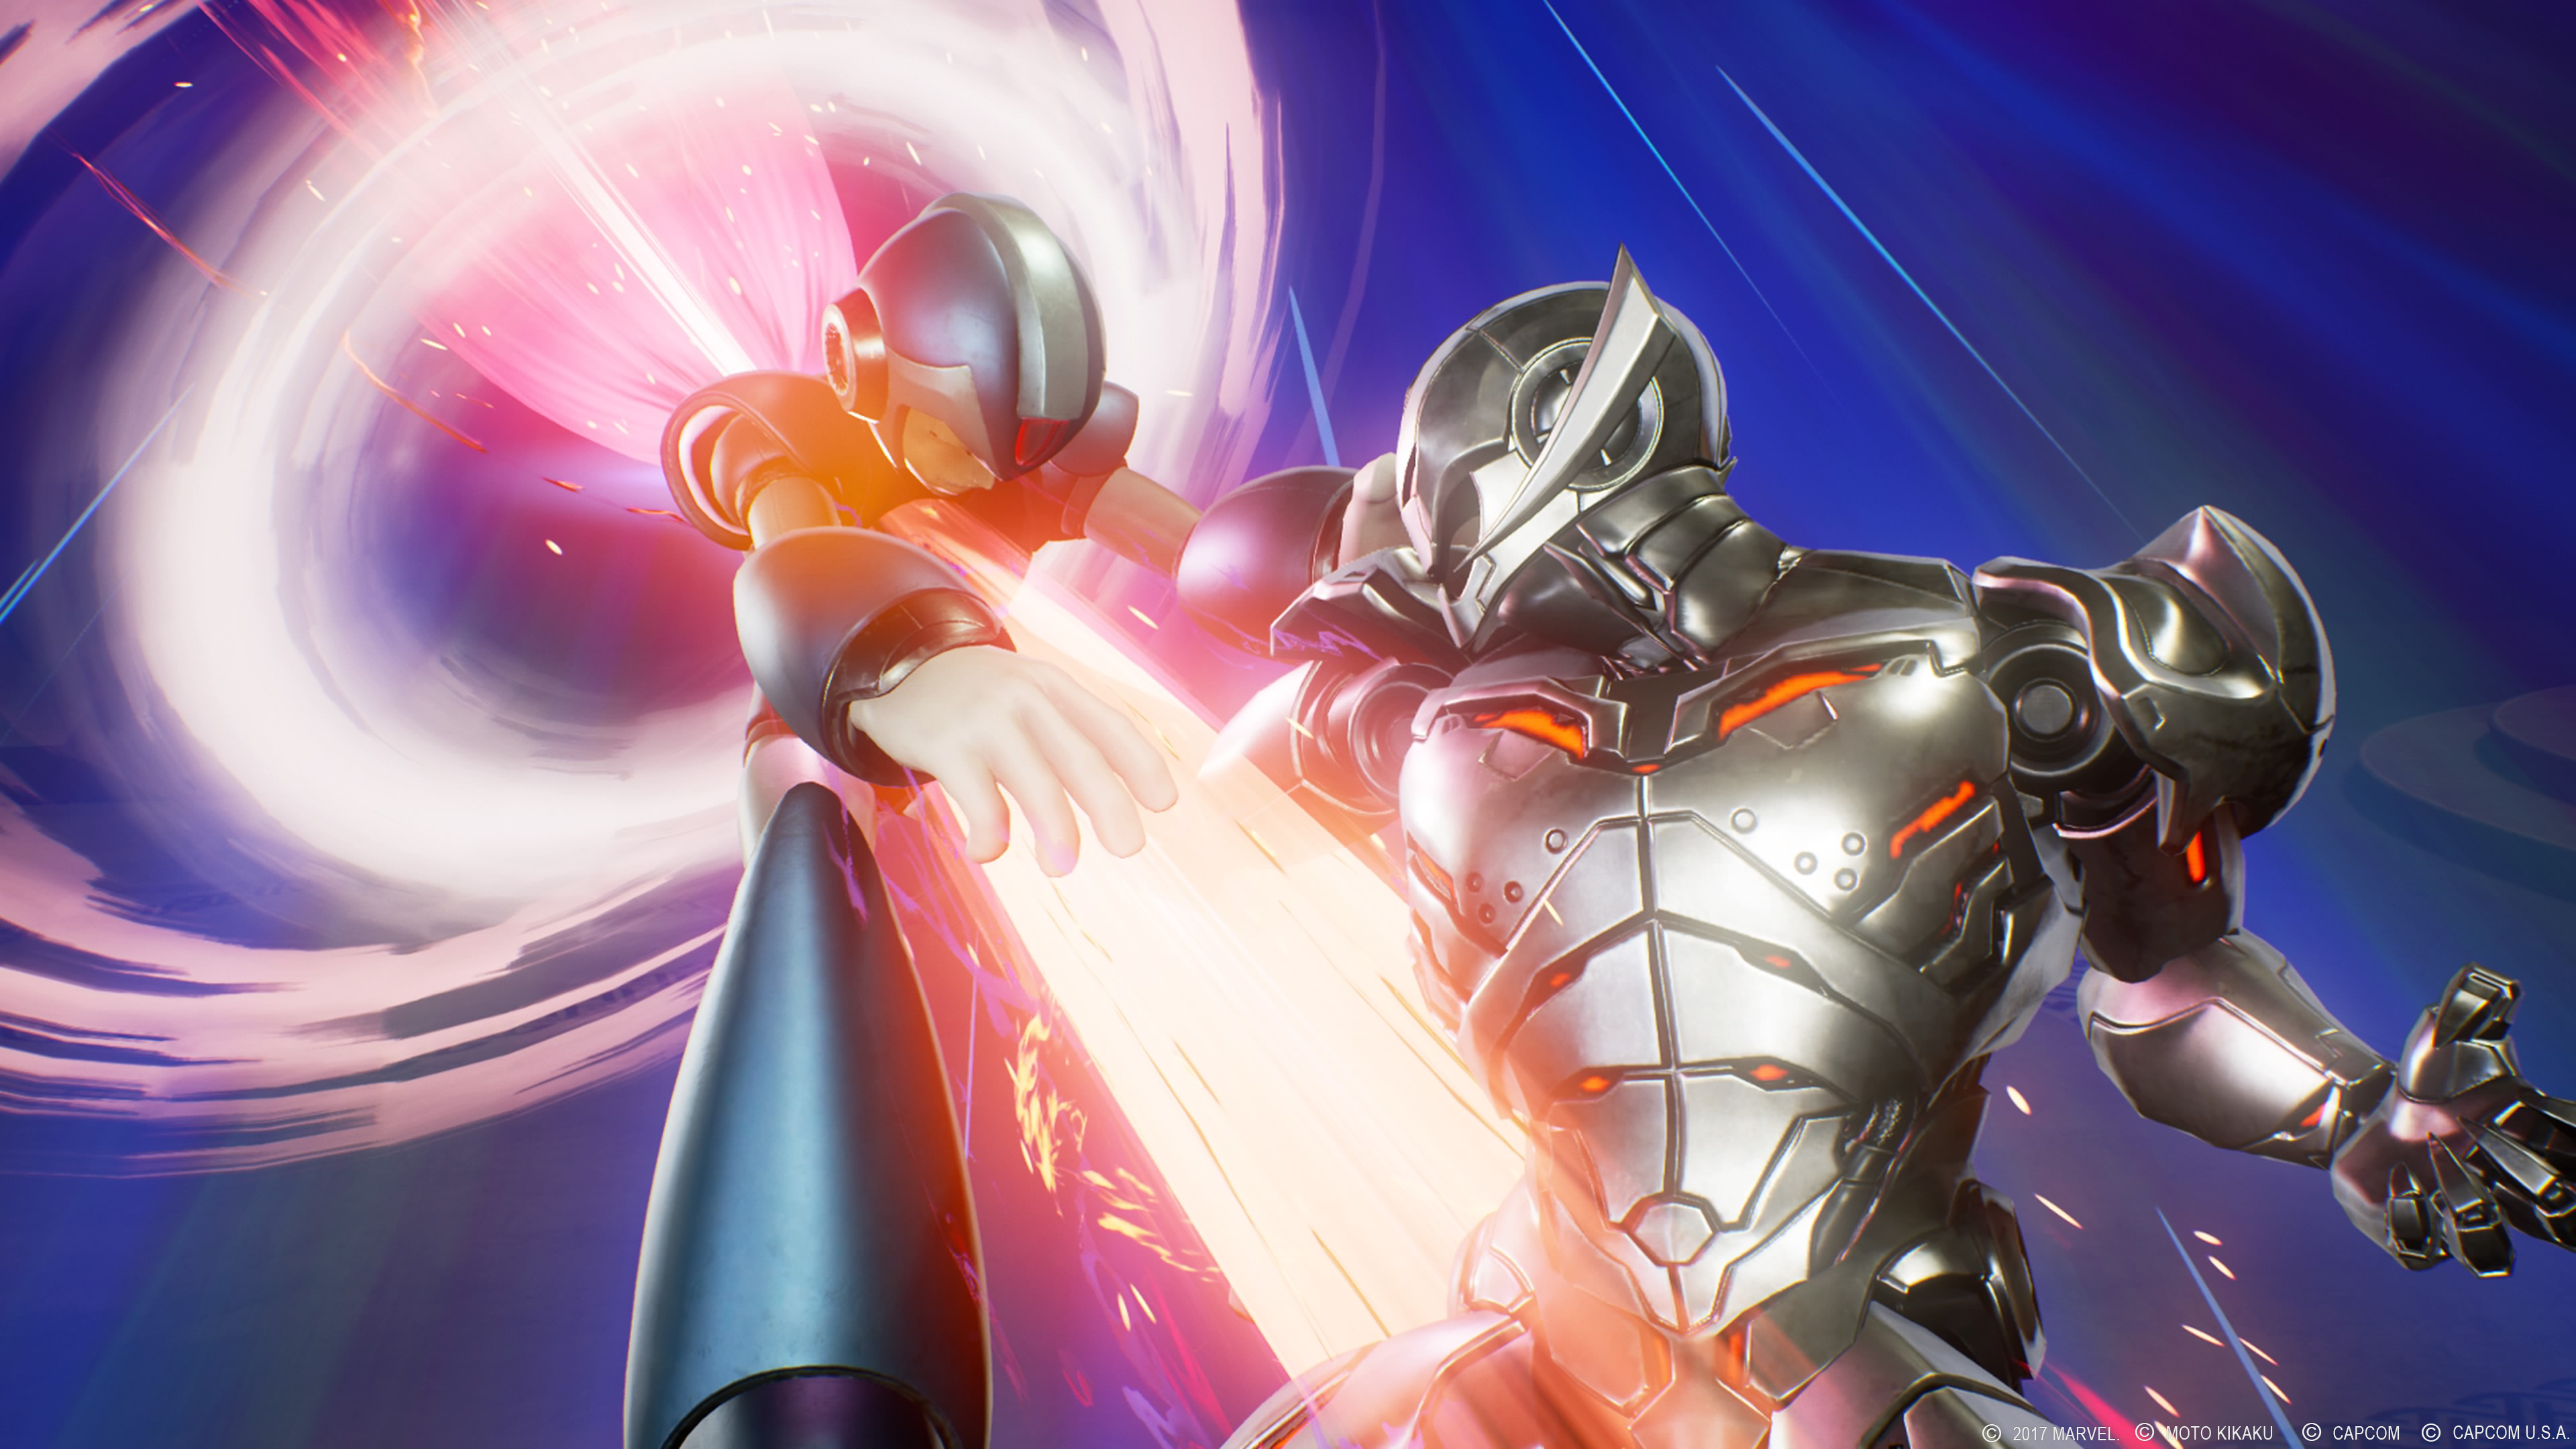 Marvel Vs. Capcom Infinite Gets A September Release Date (And A Raccoon)